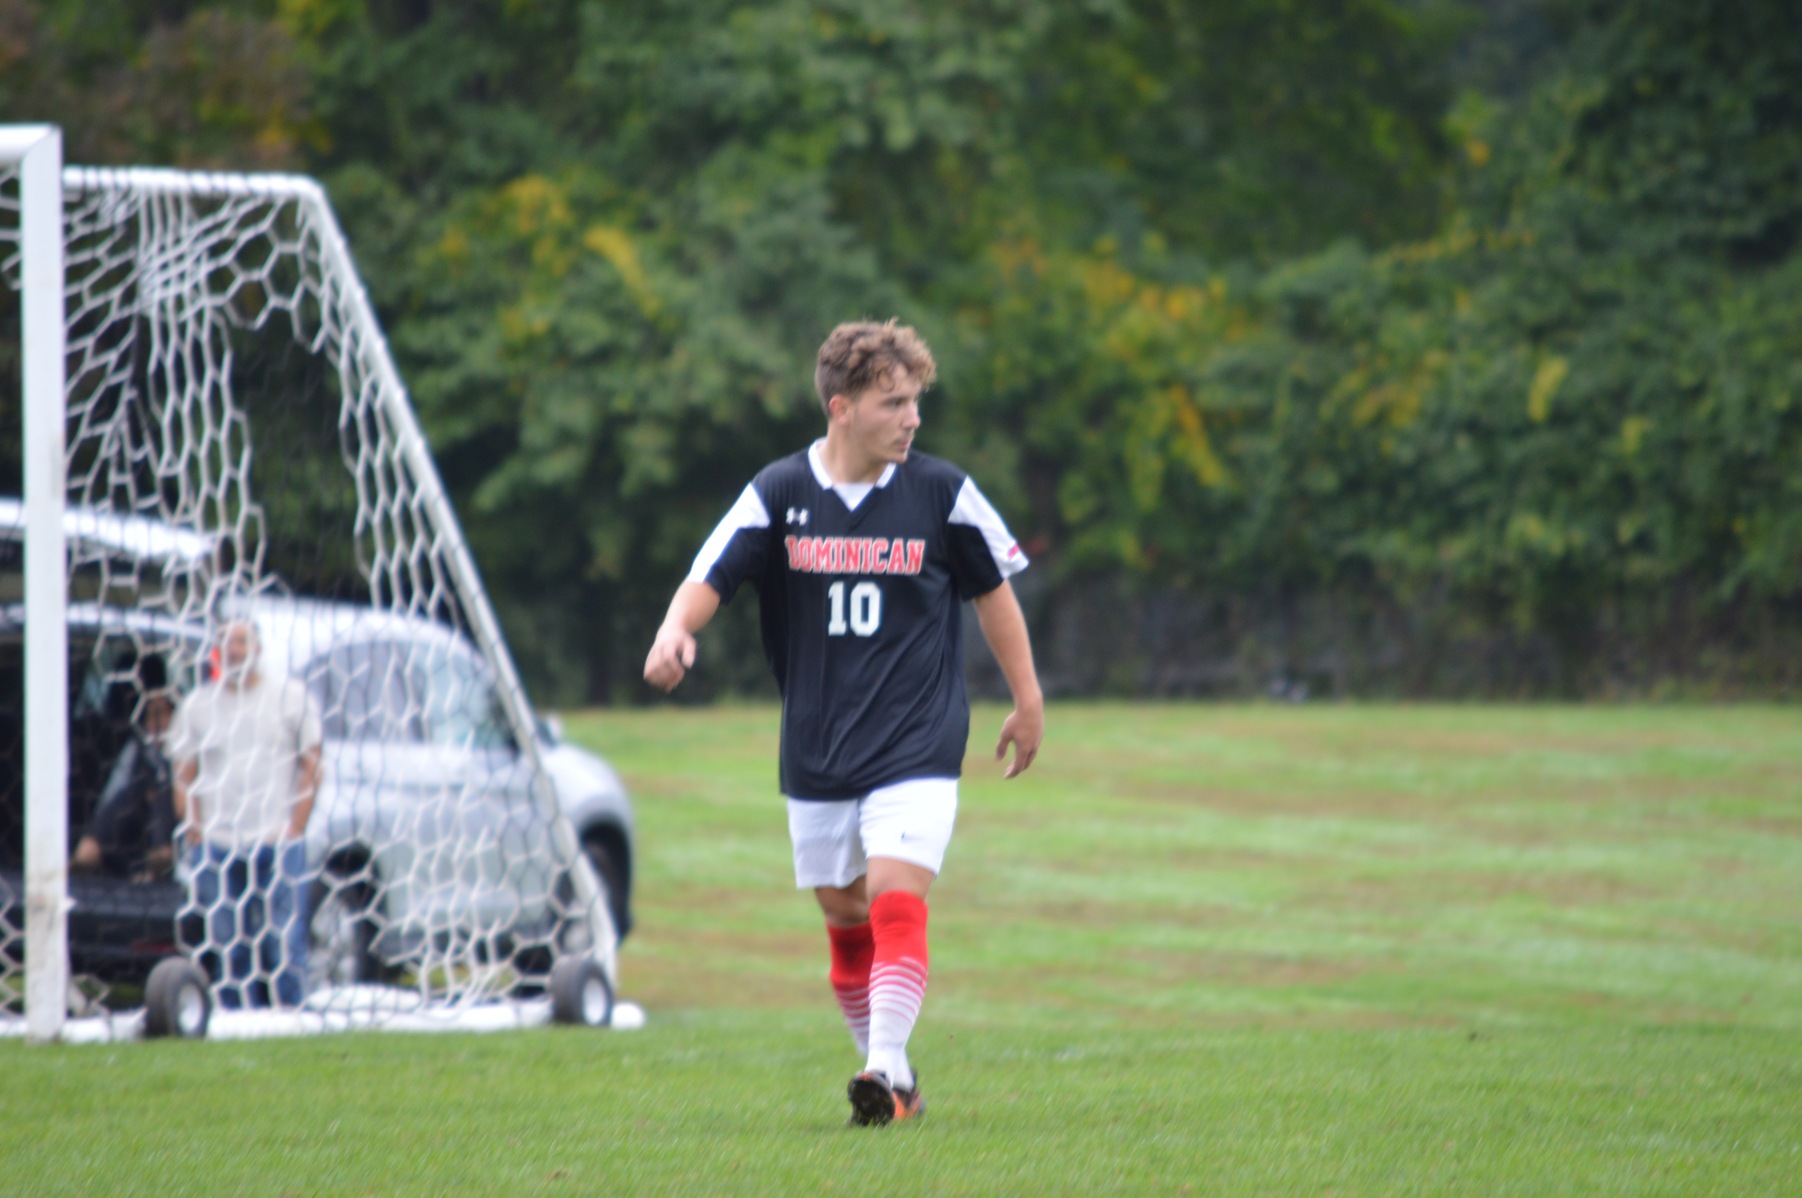 MEN'S SOCCER FALLS IN NON-CONFERENCE GAME TO MERCY COLLEGE